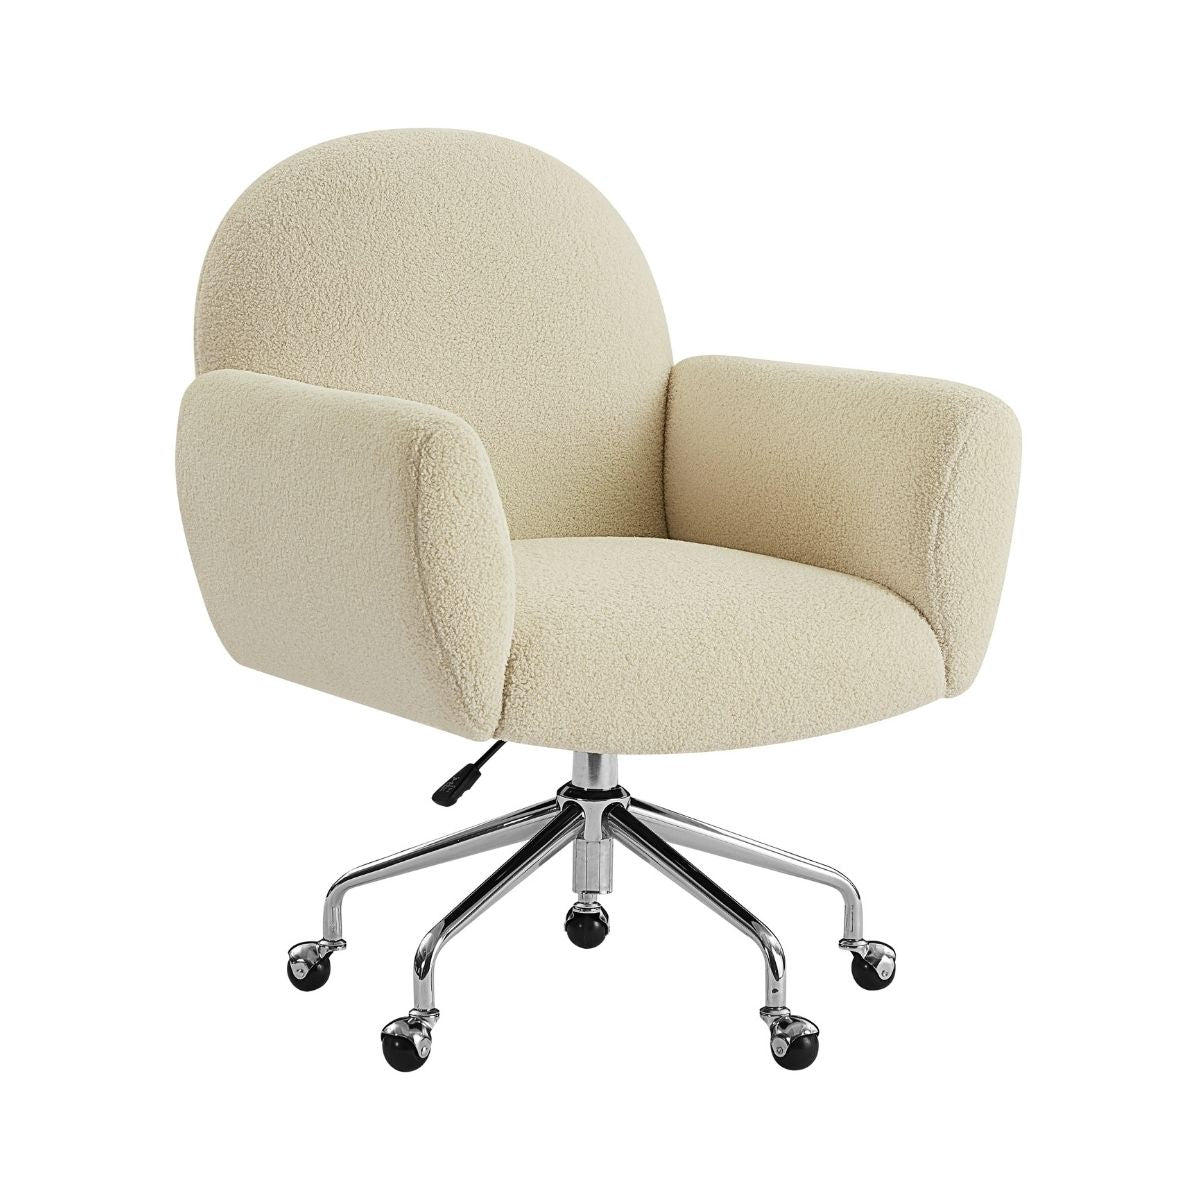 Lacey Office Chair - Creamy White